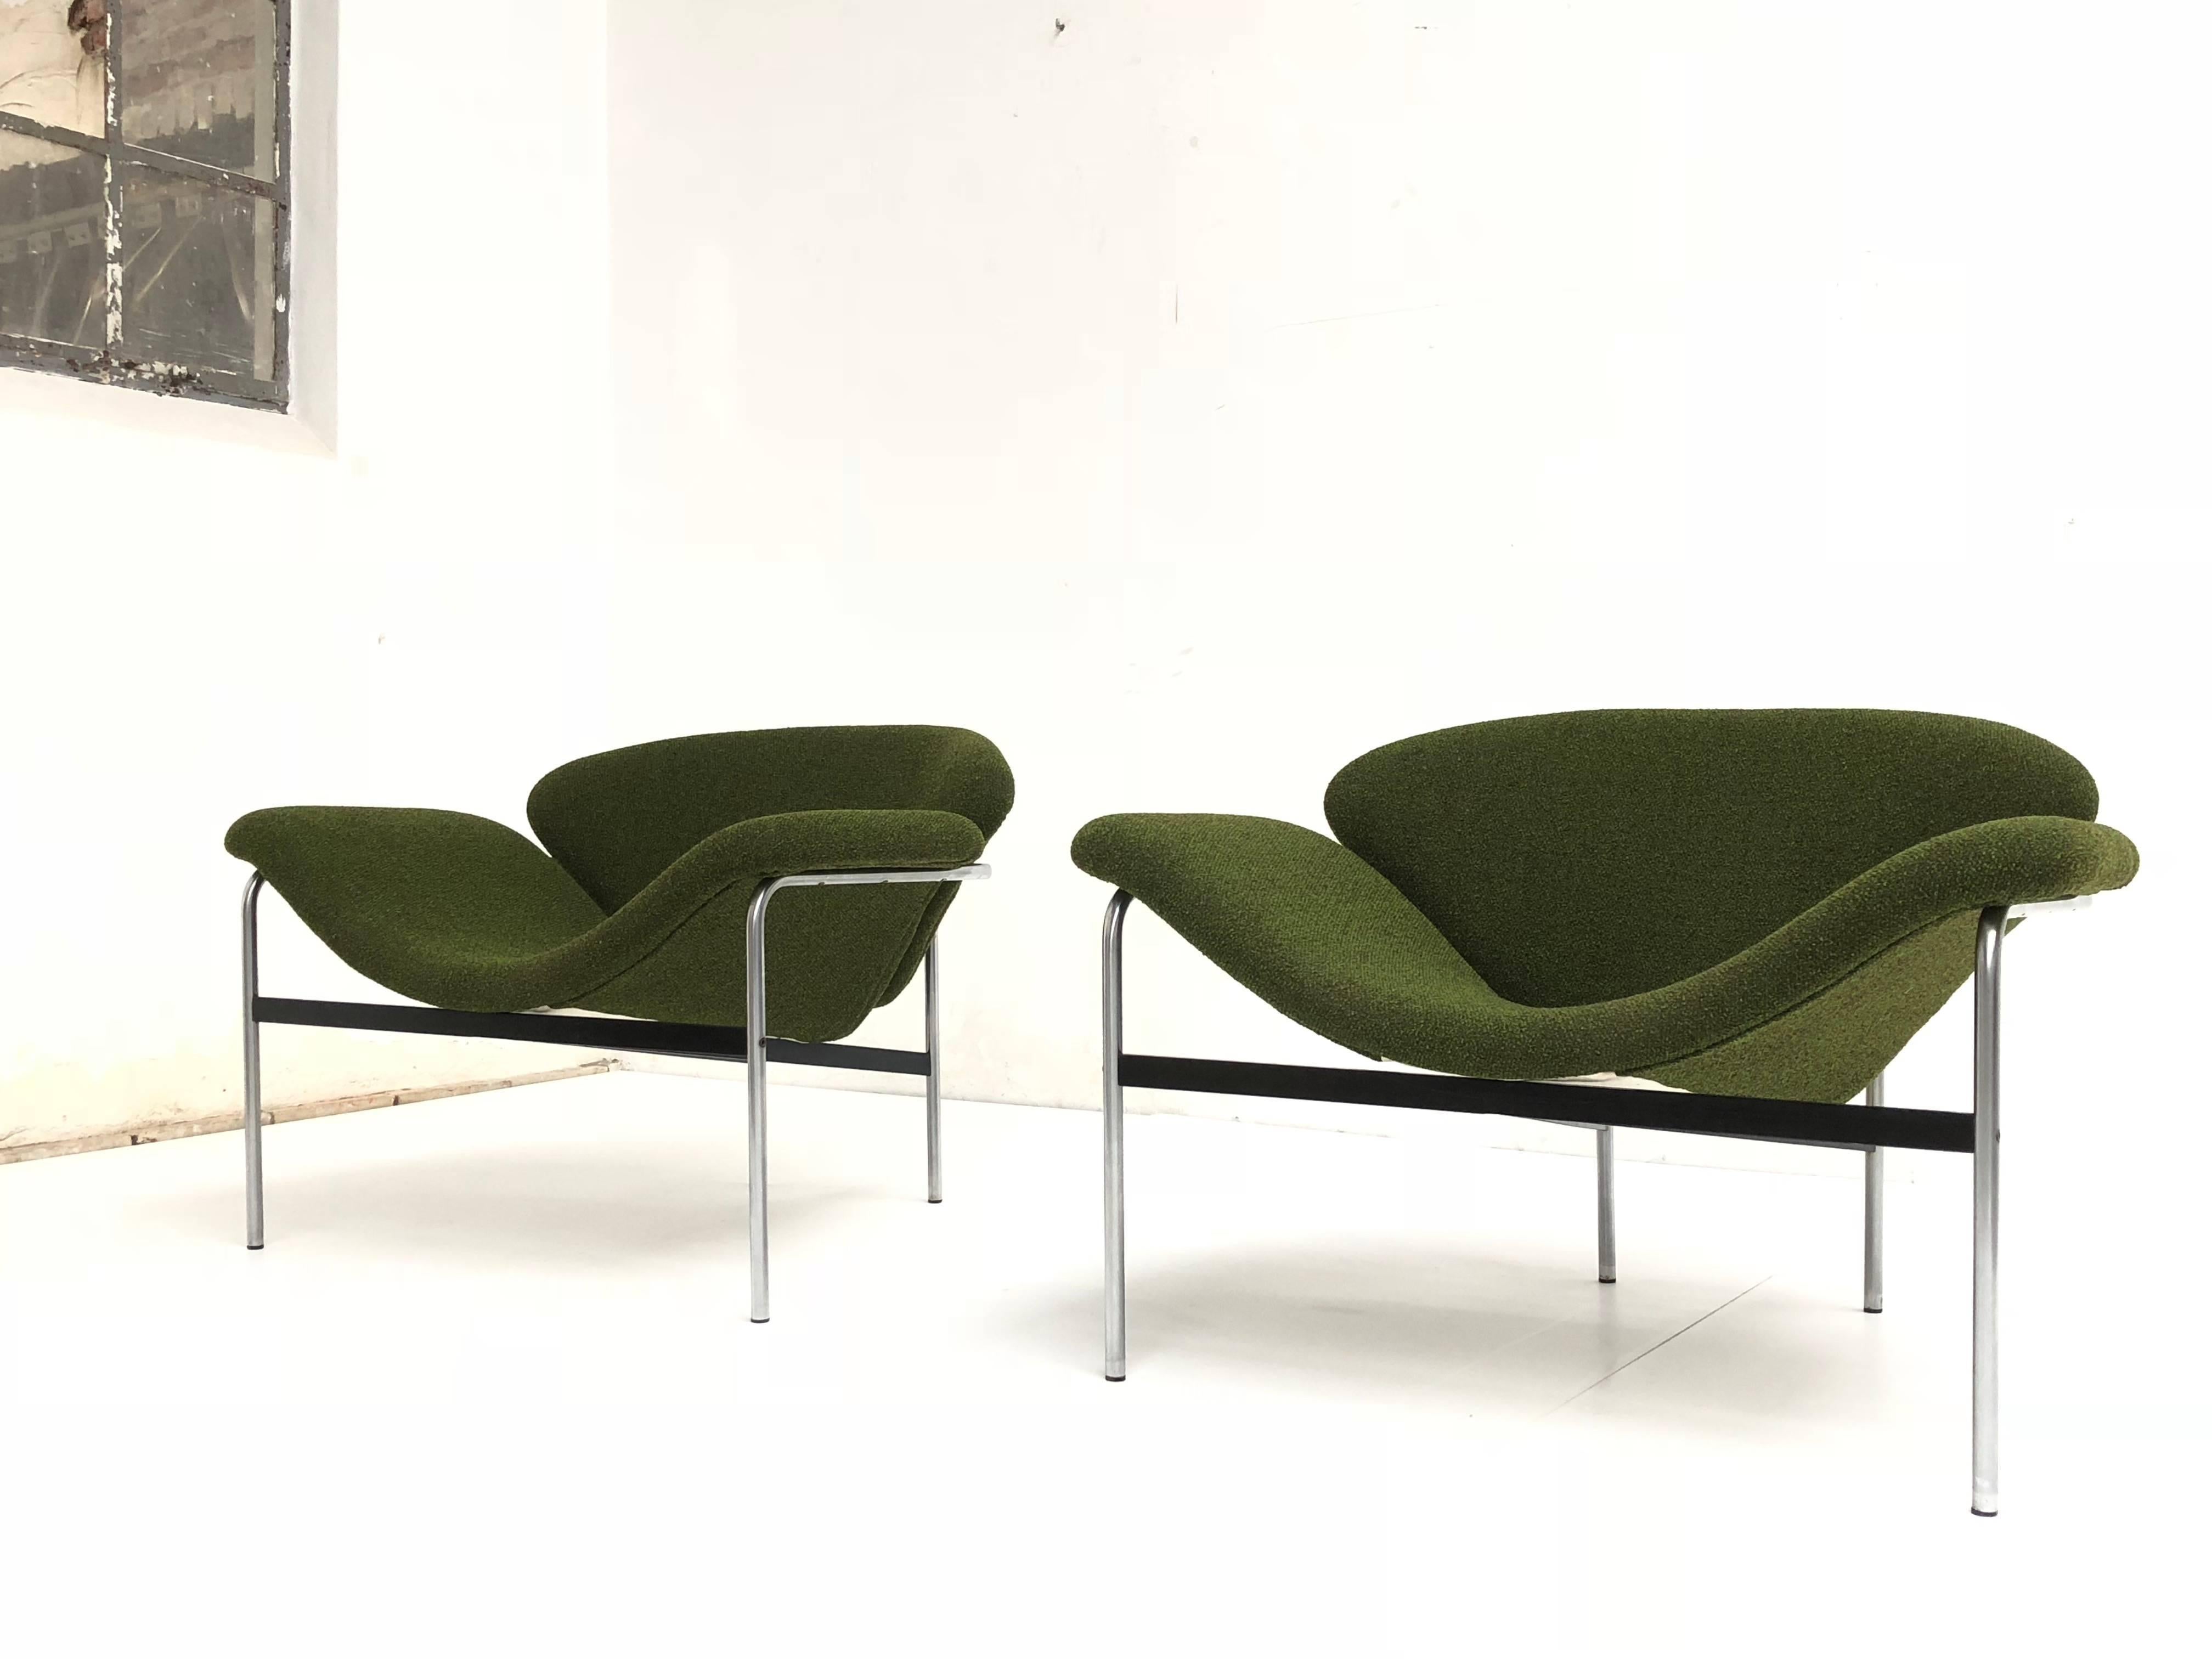 Steel Rare Pair of 1960s Dutch 'Groovy' Lounge Chairs Attributed to Gelderland